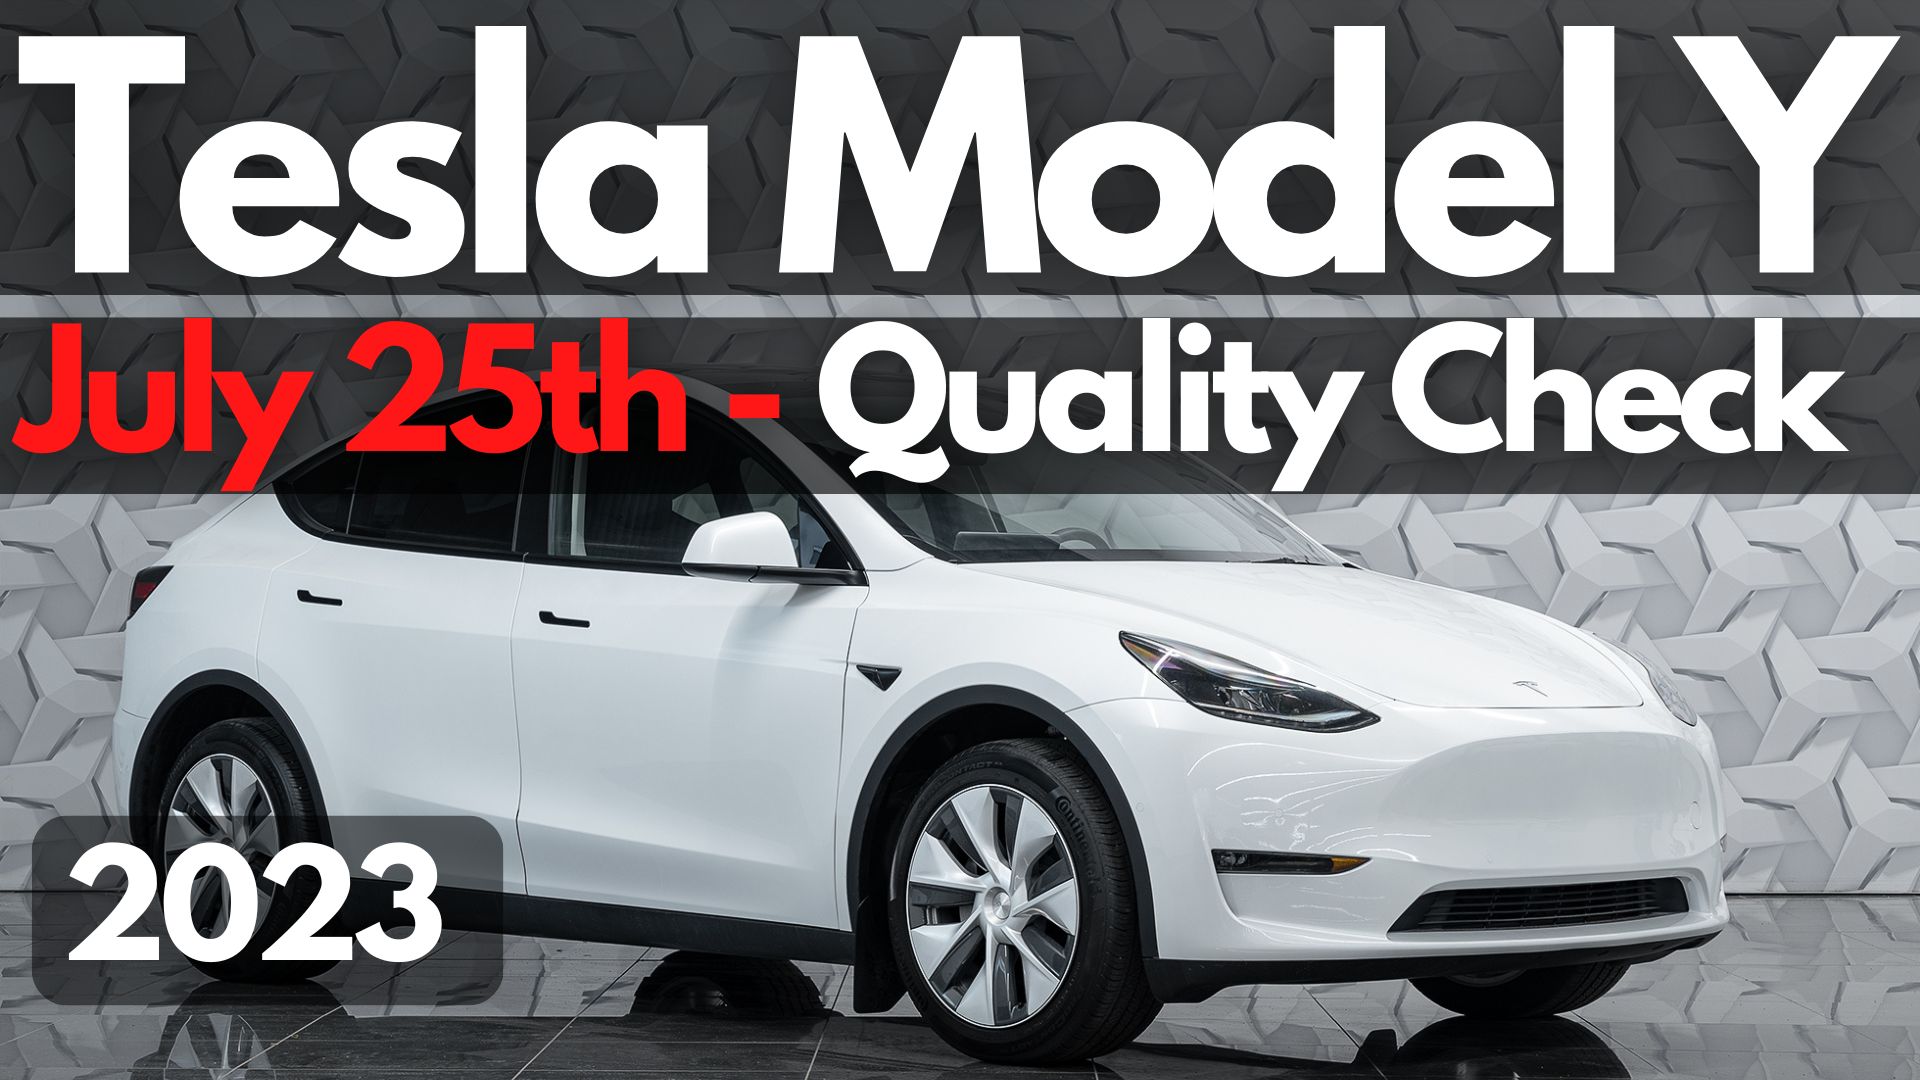 Has Tesla Improved The Model Y Build Quality For July 25, 2023?